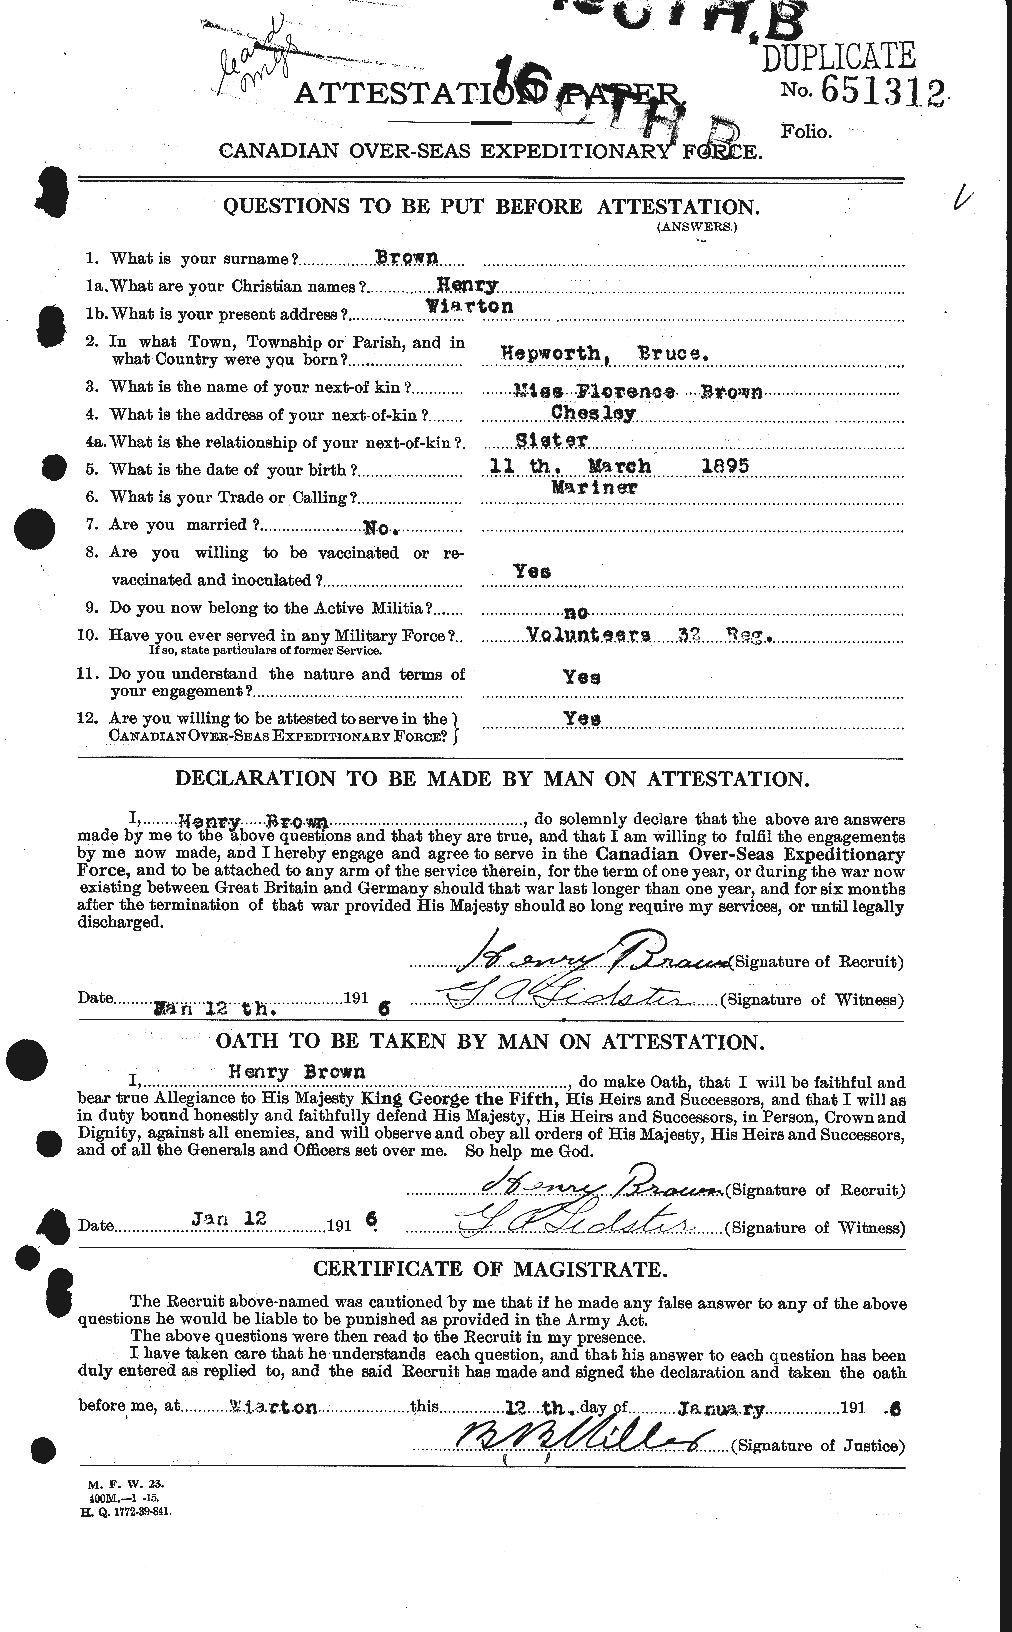 Personnel Records of the First World War - CEF 265508a